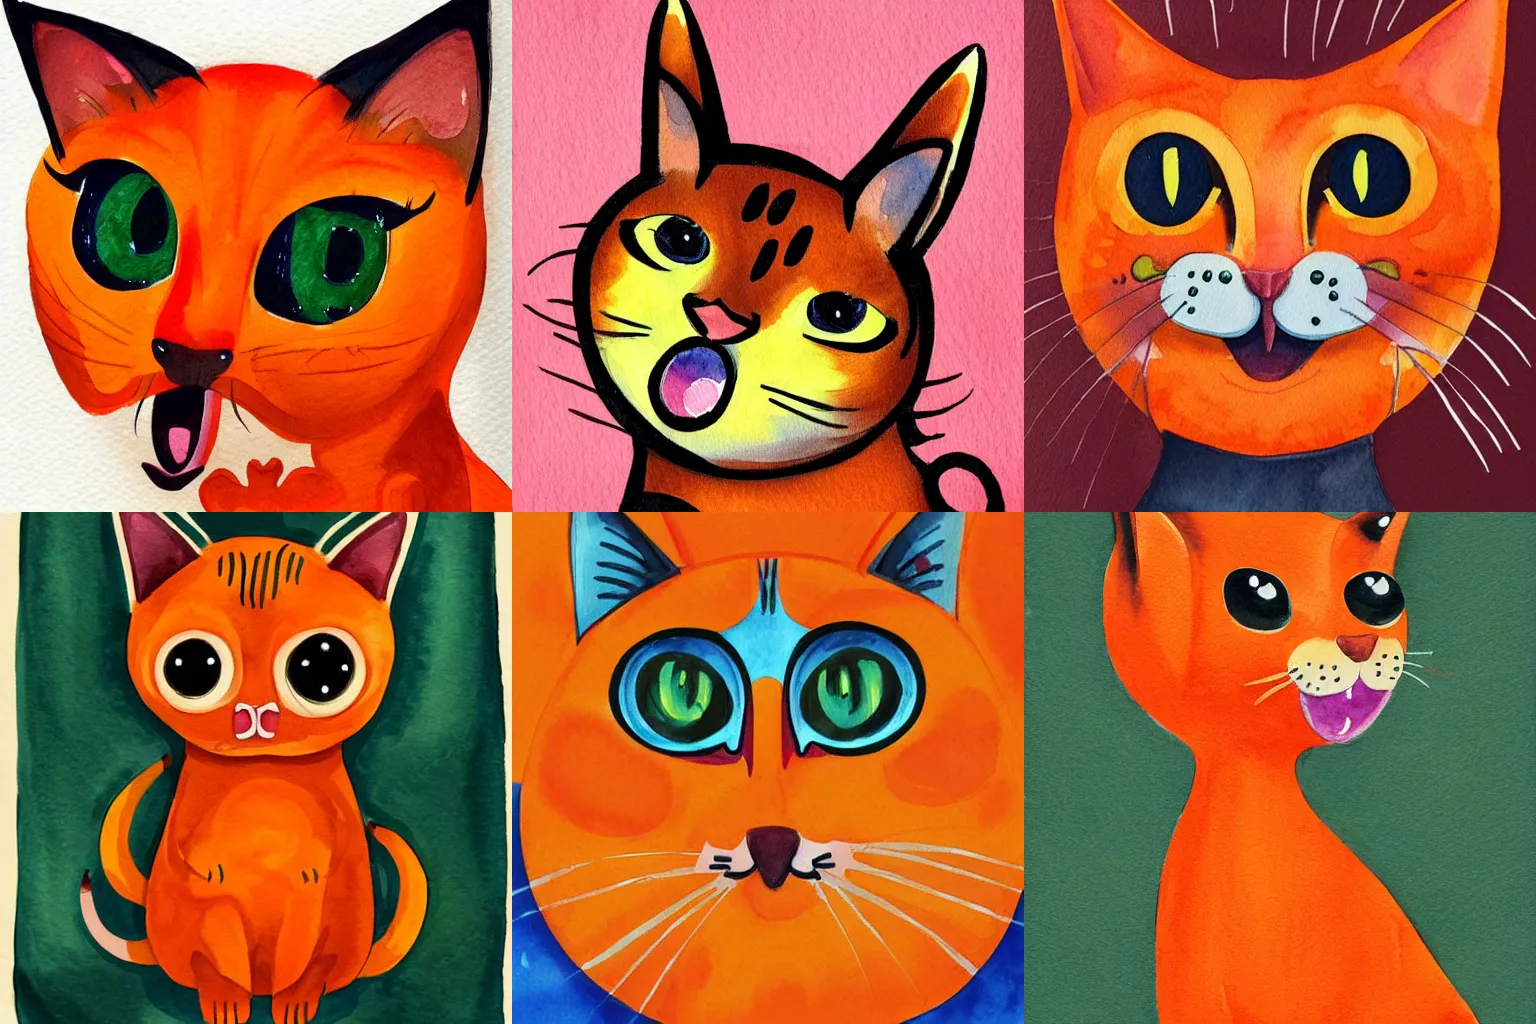 Prompt: A stylized painting of an Orange cat with big eyes and a wide open mouth, watercolor on paper, Vibrant, Cute, Popular on Reddit, Behance